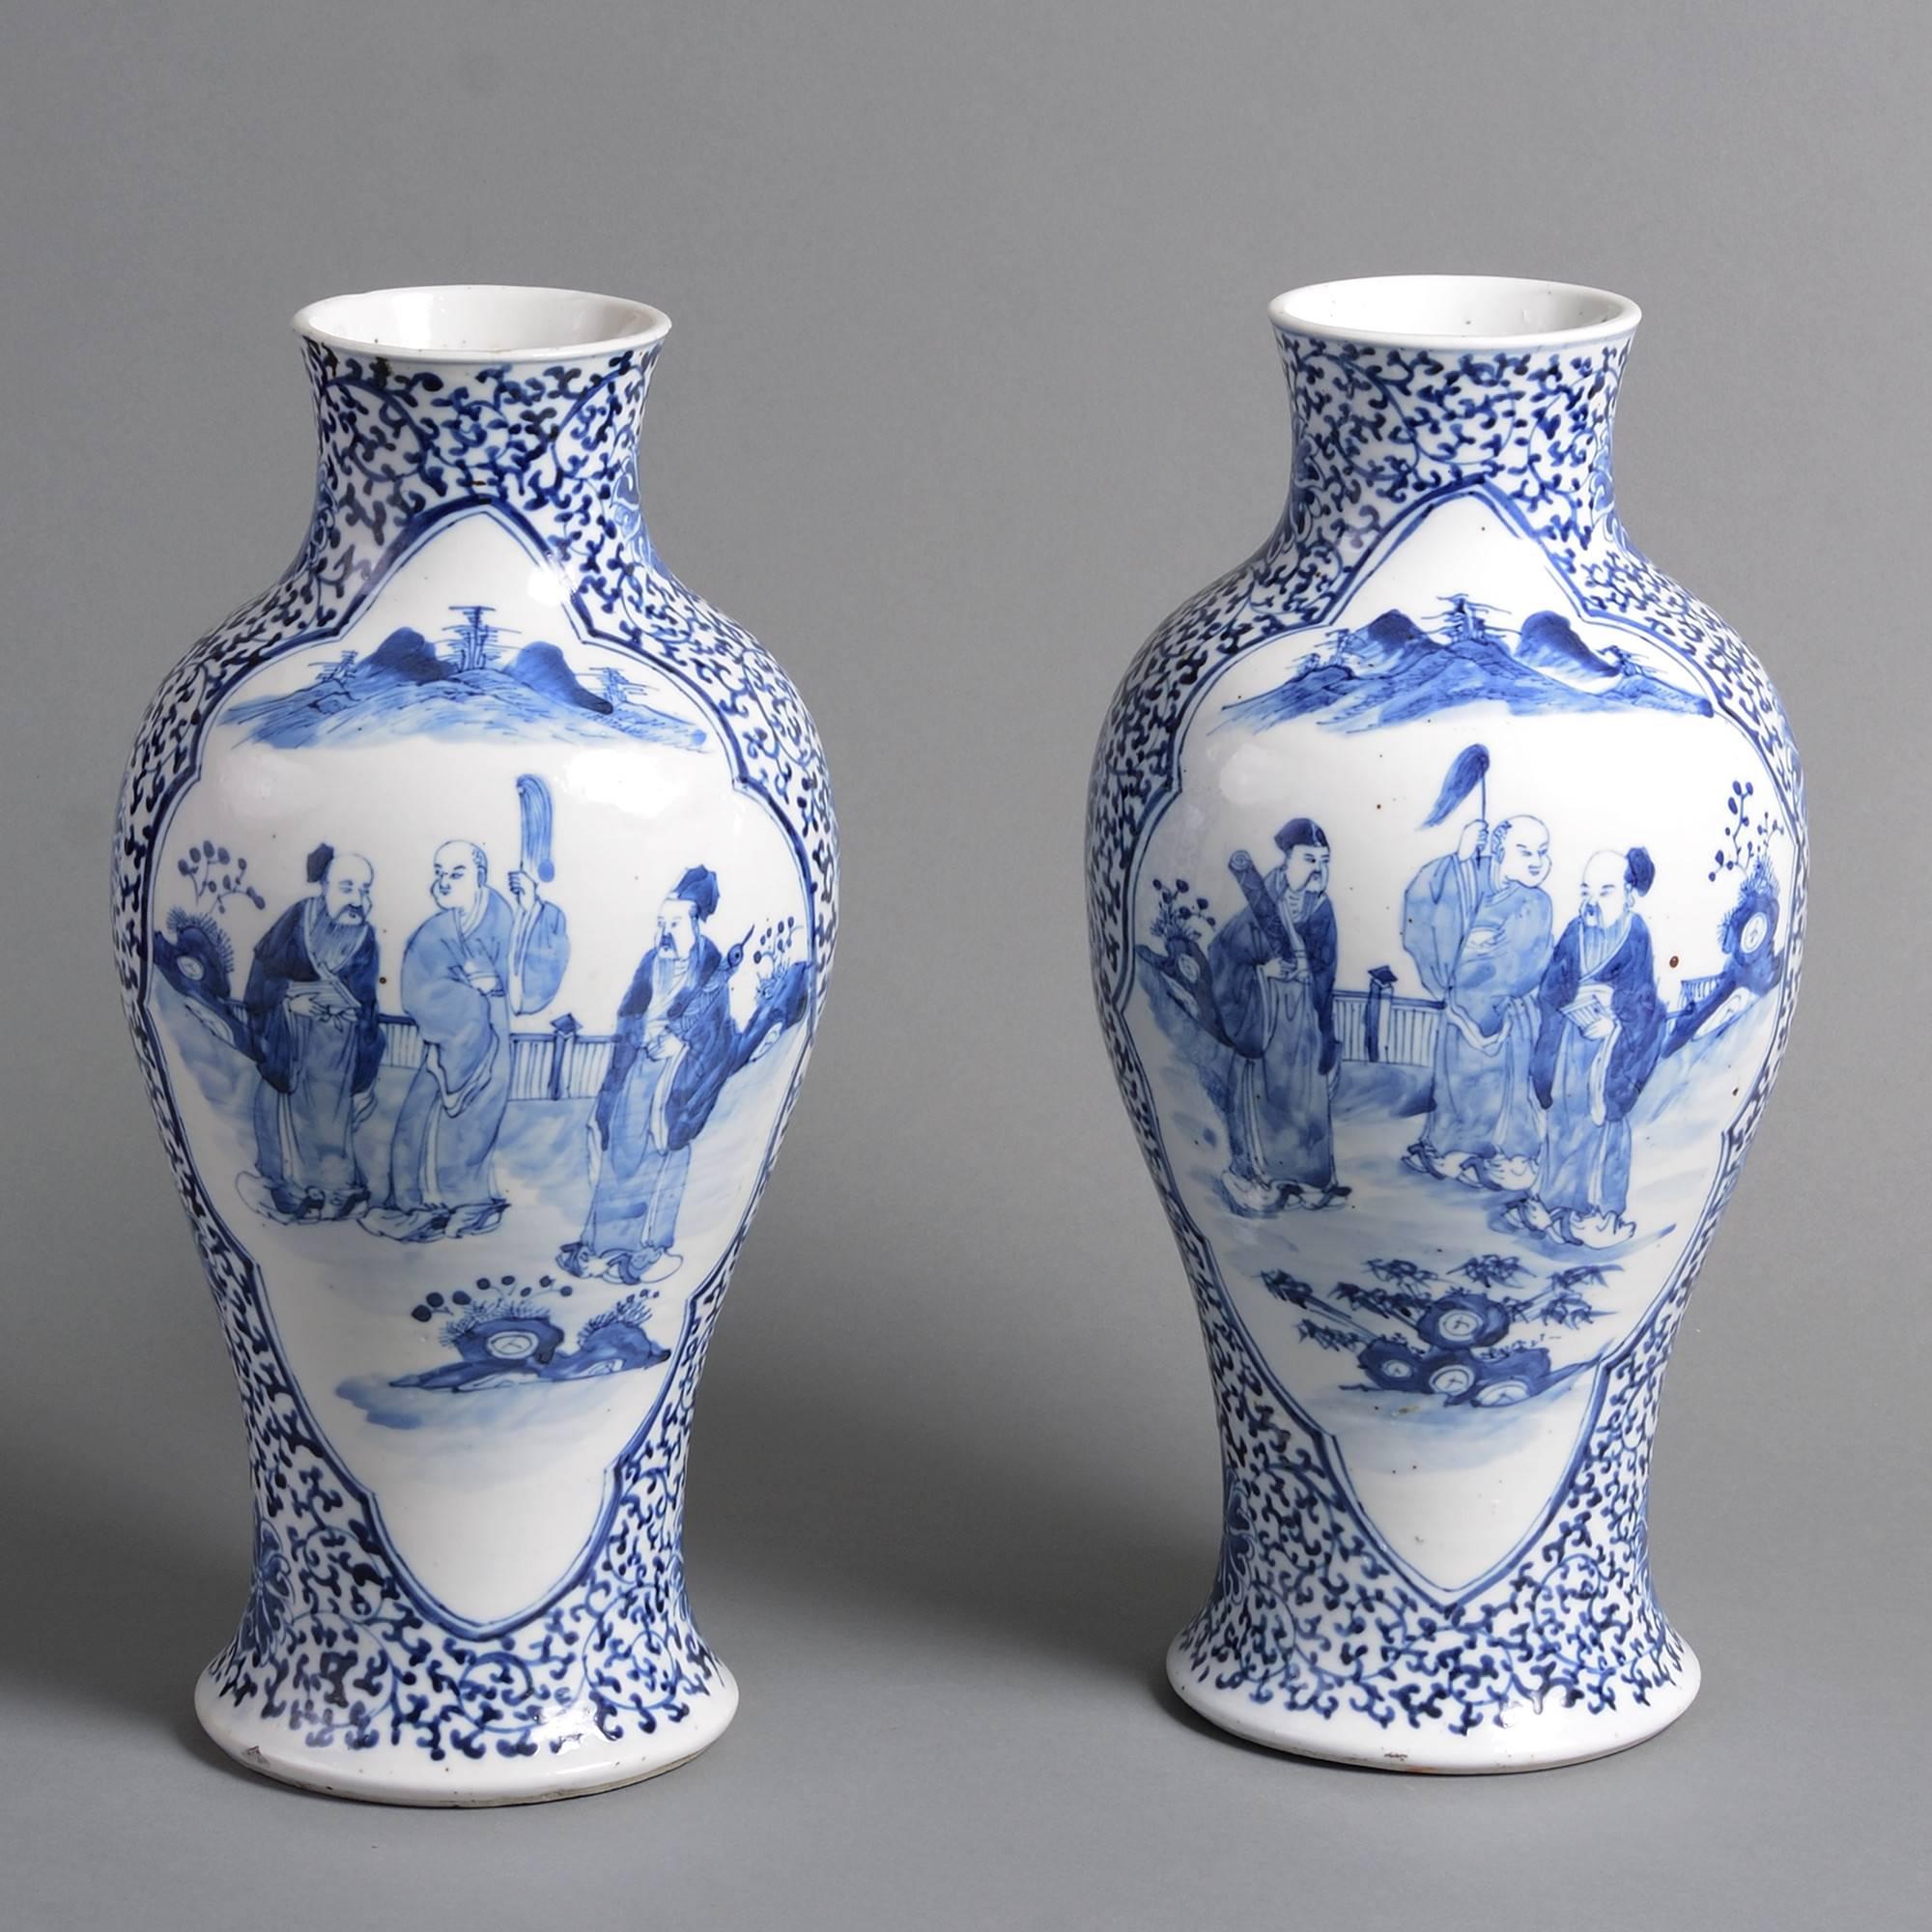 A pair of late 19th century blue and white porcelain baluster vases, the bodies with foliate grounds and figurative cartouches.